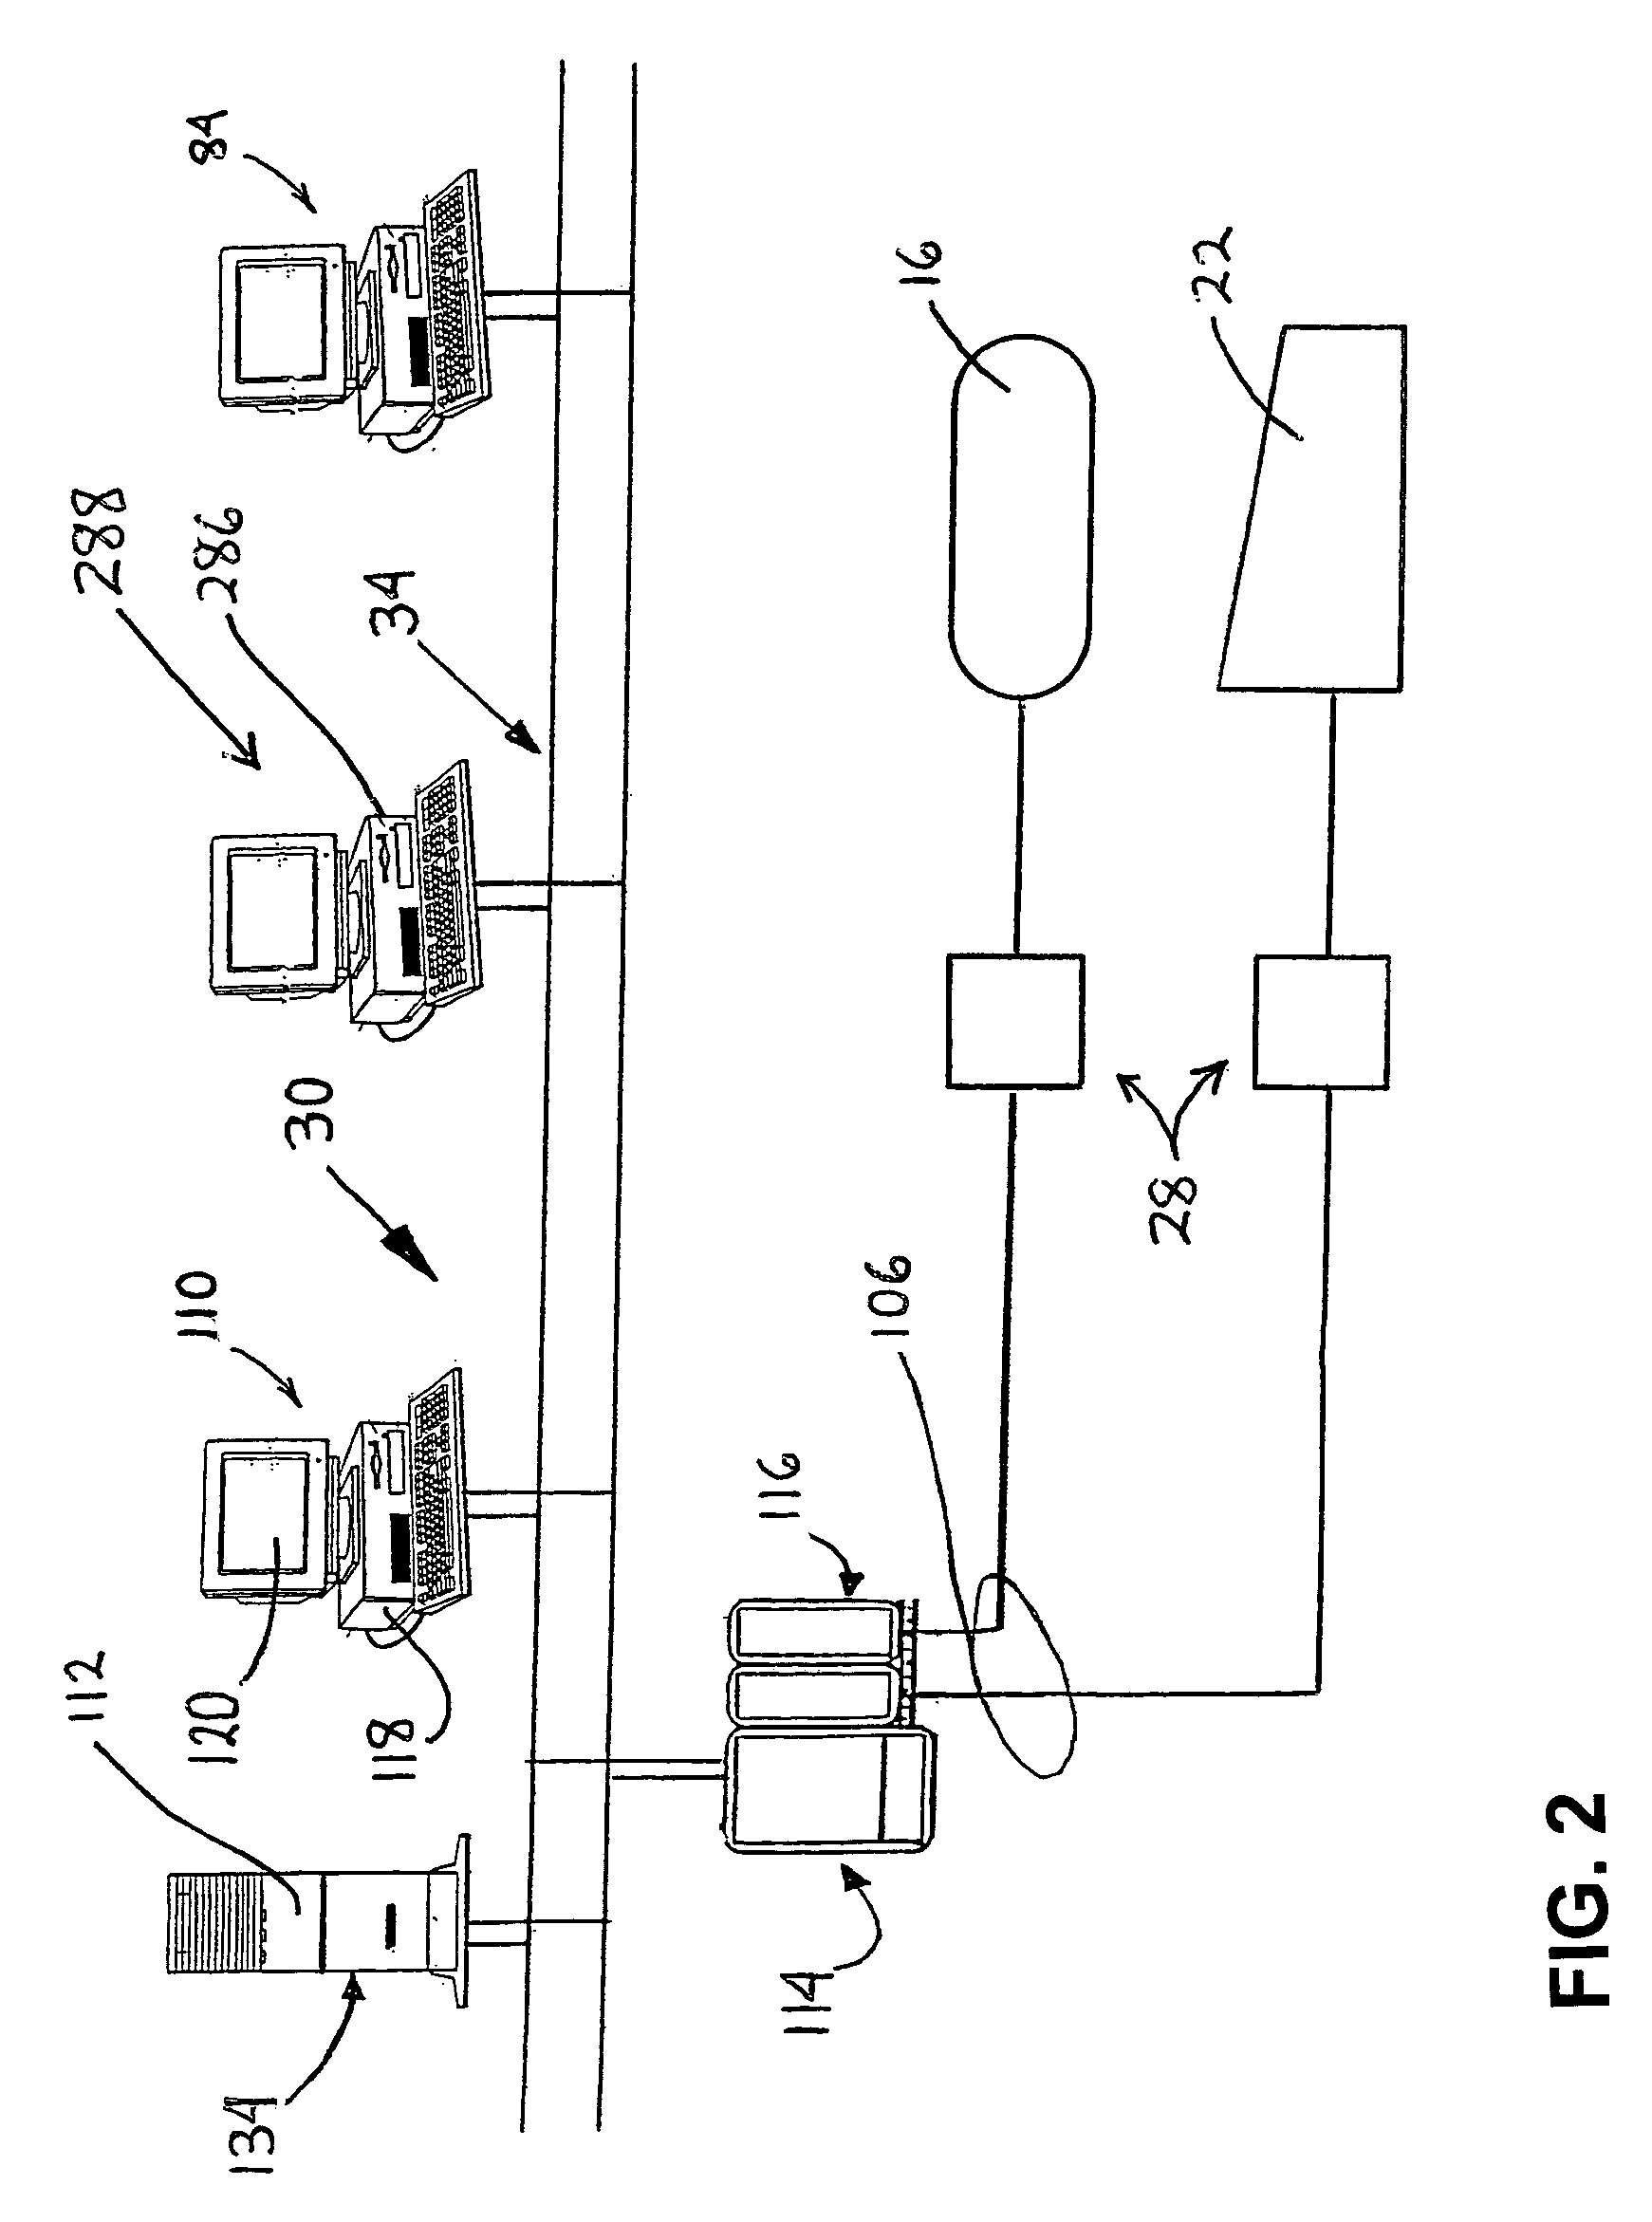 System and method for vibration monitoring